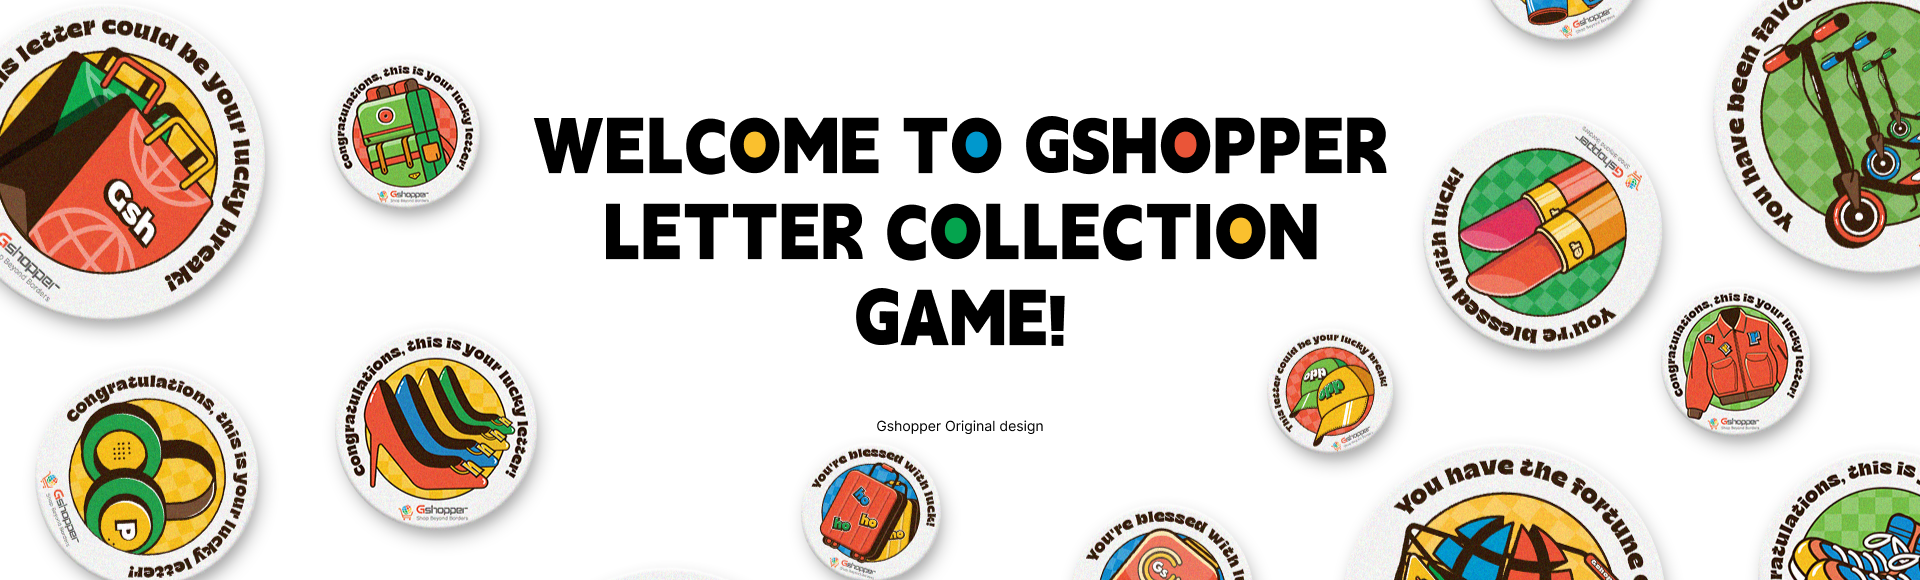 Welcome to Gshopper letter collection game!